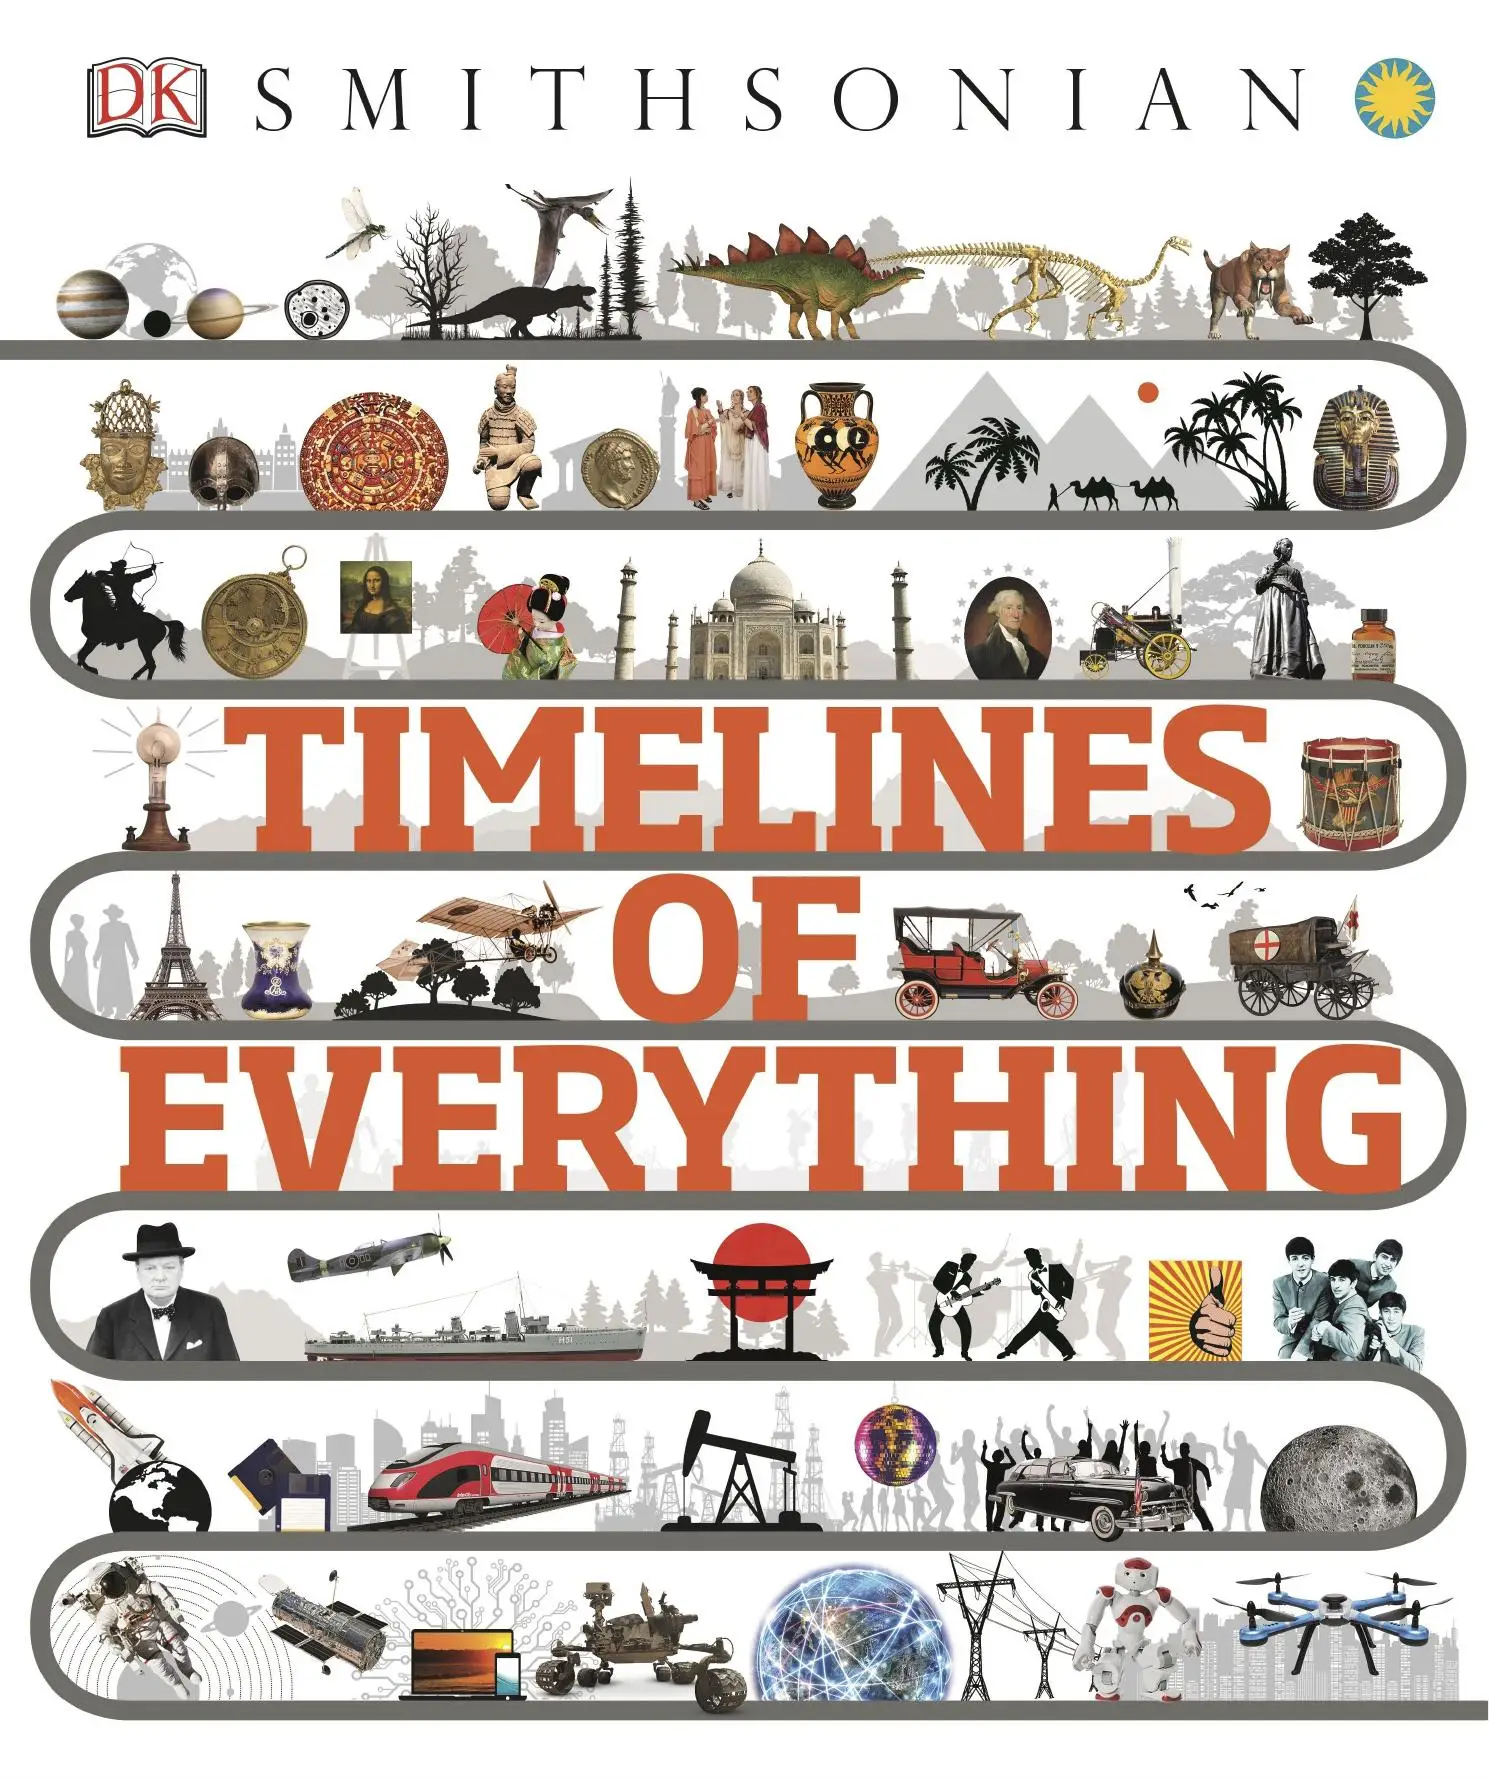 Smithsonian Timelines of Everything / AvaxHome